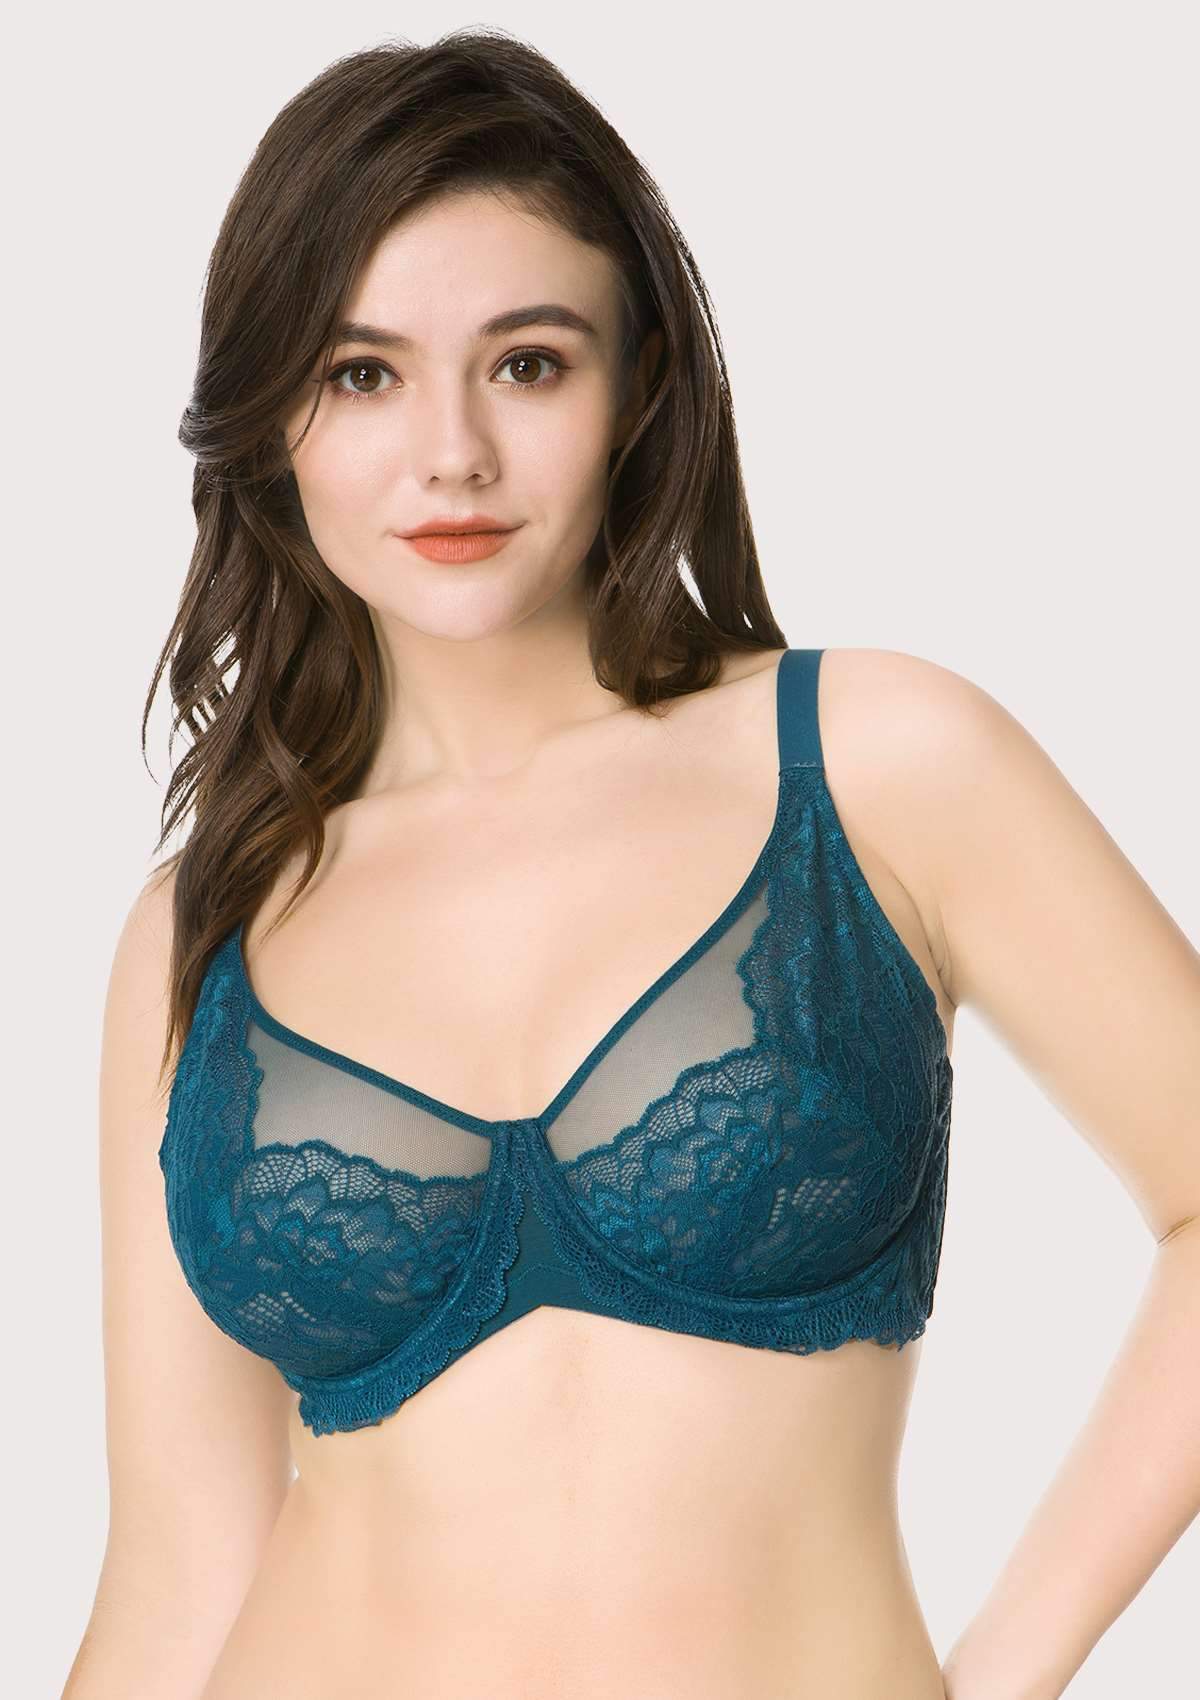 HSIA Peony Lace Unlined Supportive Underwire Bra - Dark Blue / 34 / C